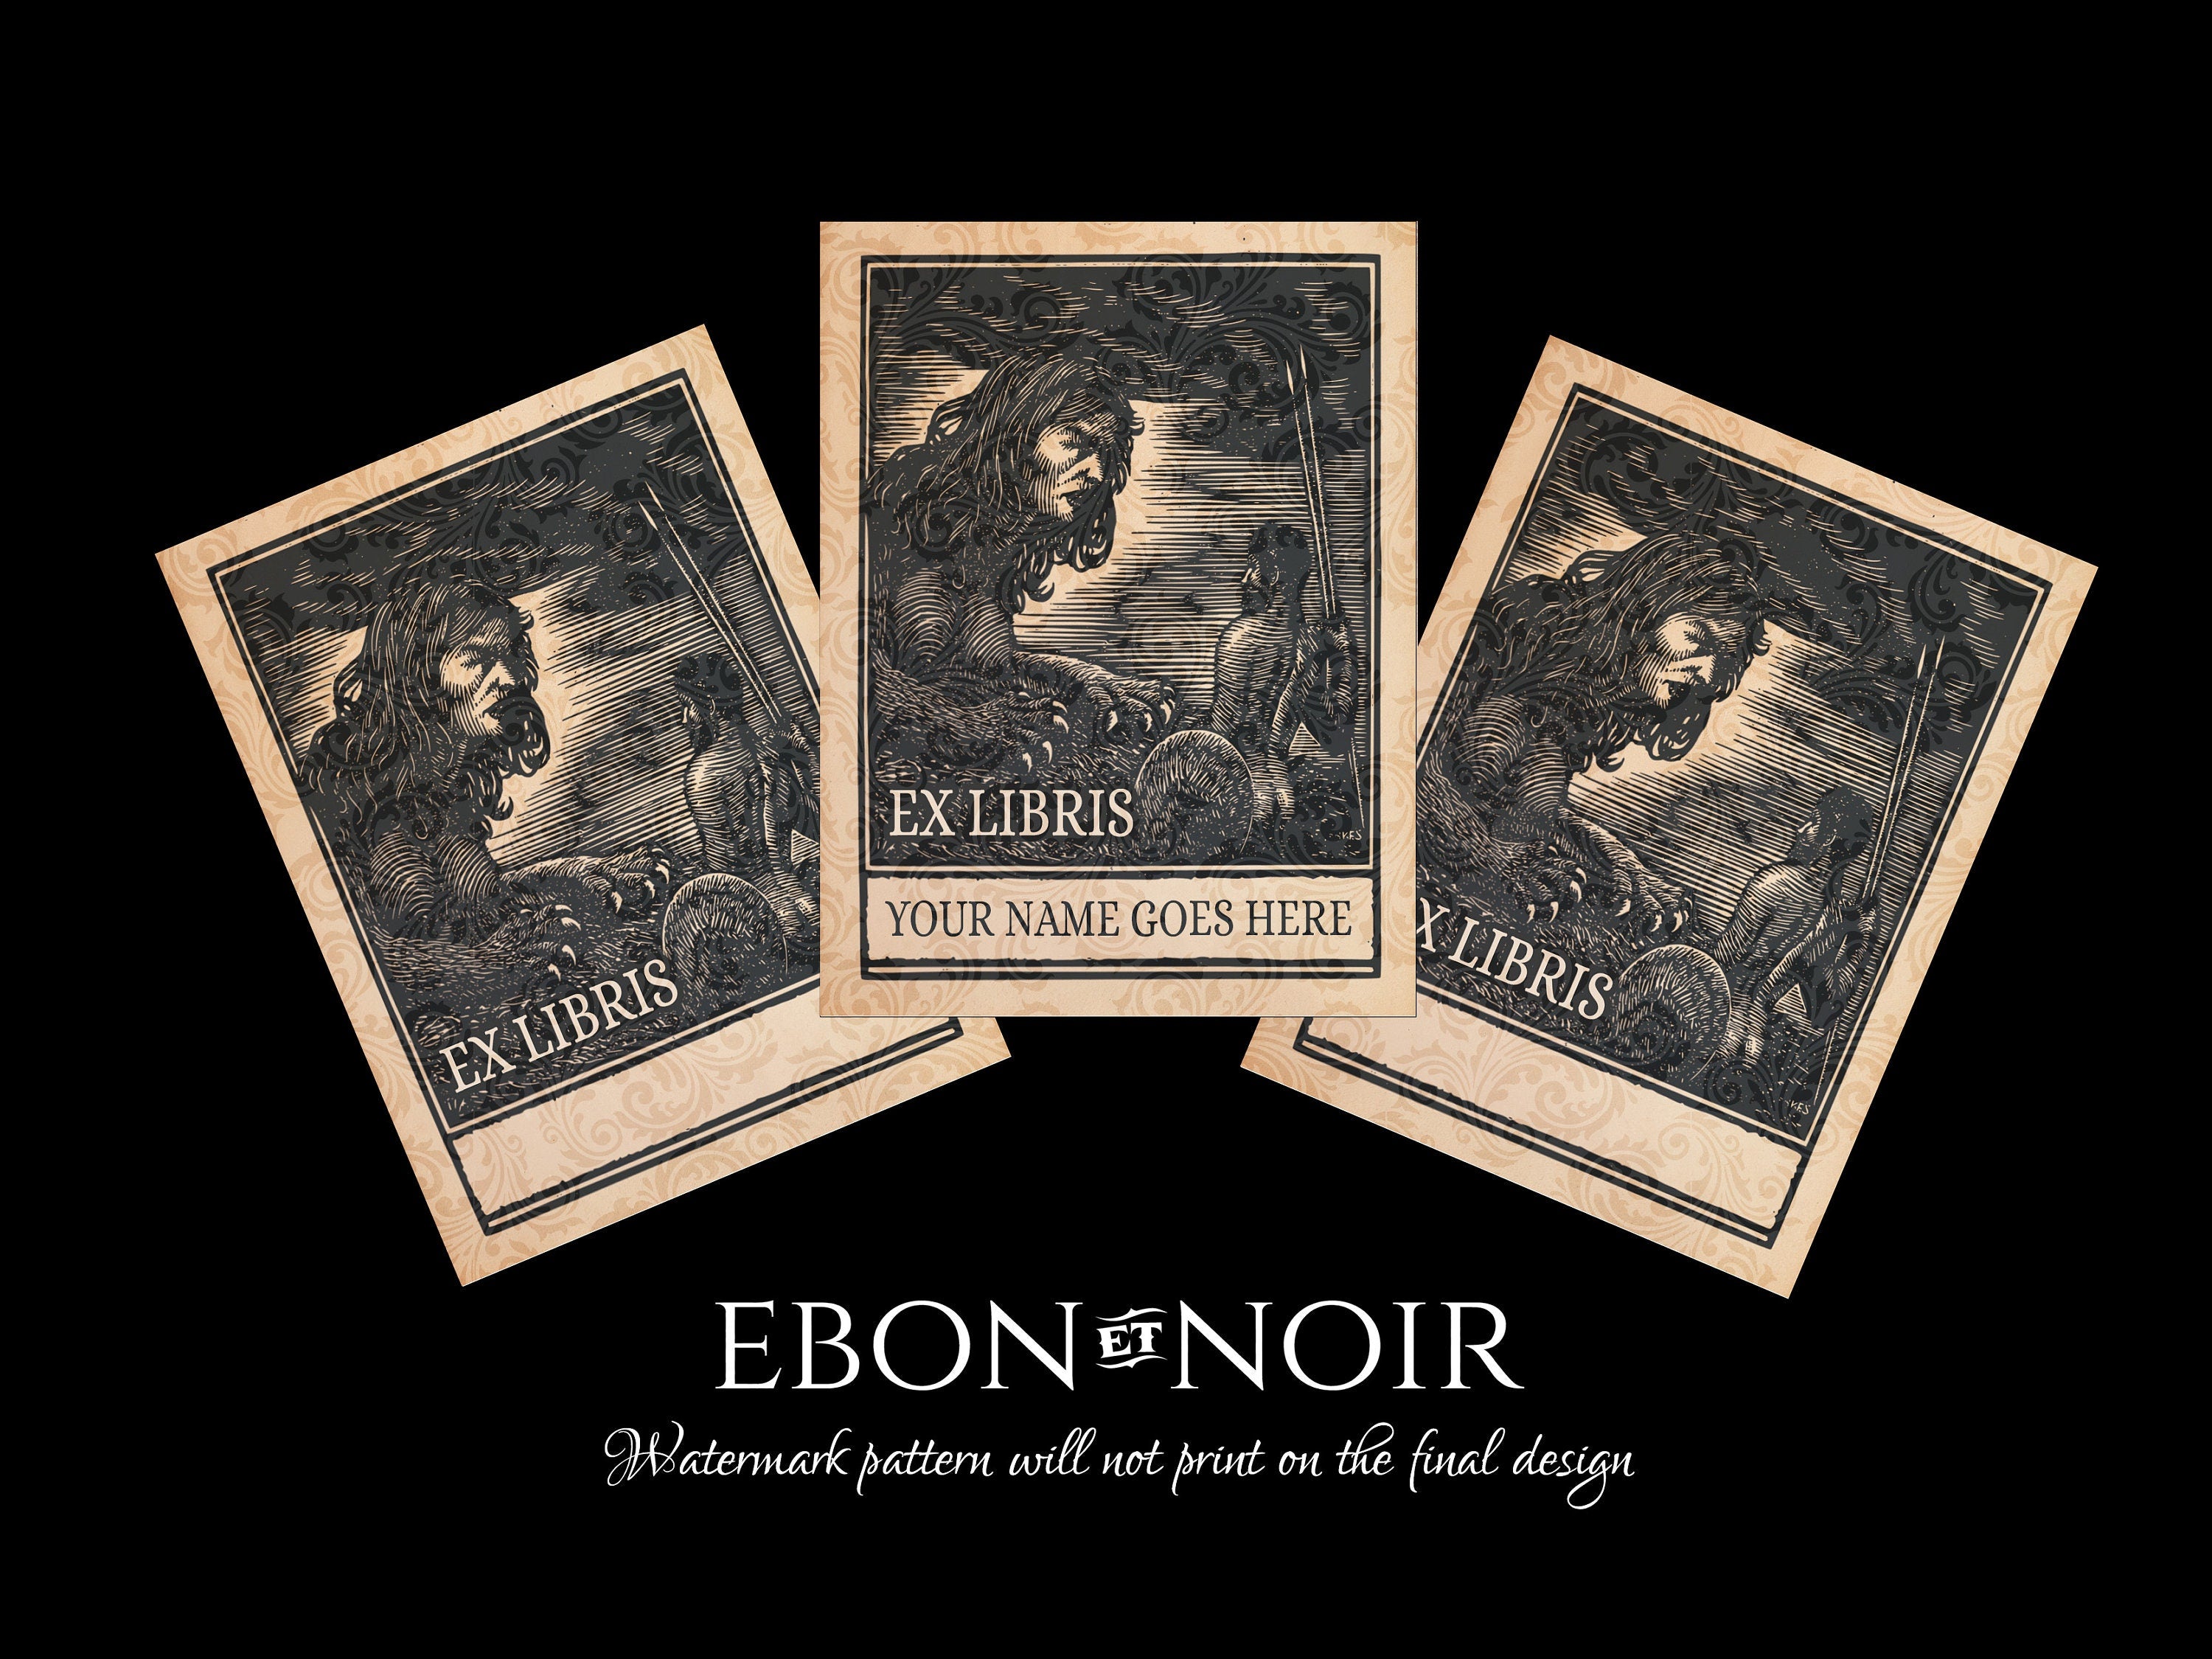 Oedipus and the Sphinx, Personalized Ex-Libris Bookplates, Crafted on Traditional Gummed Paper, 3in x 4in, Set of 30